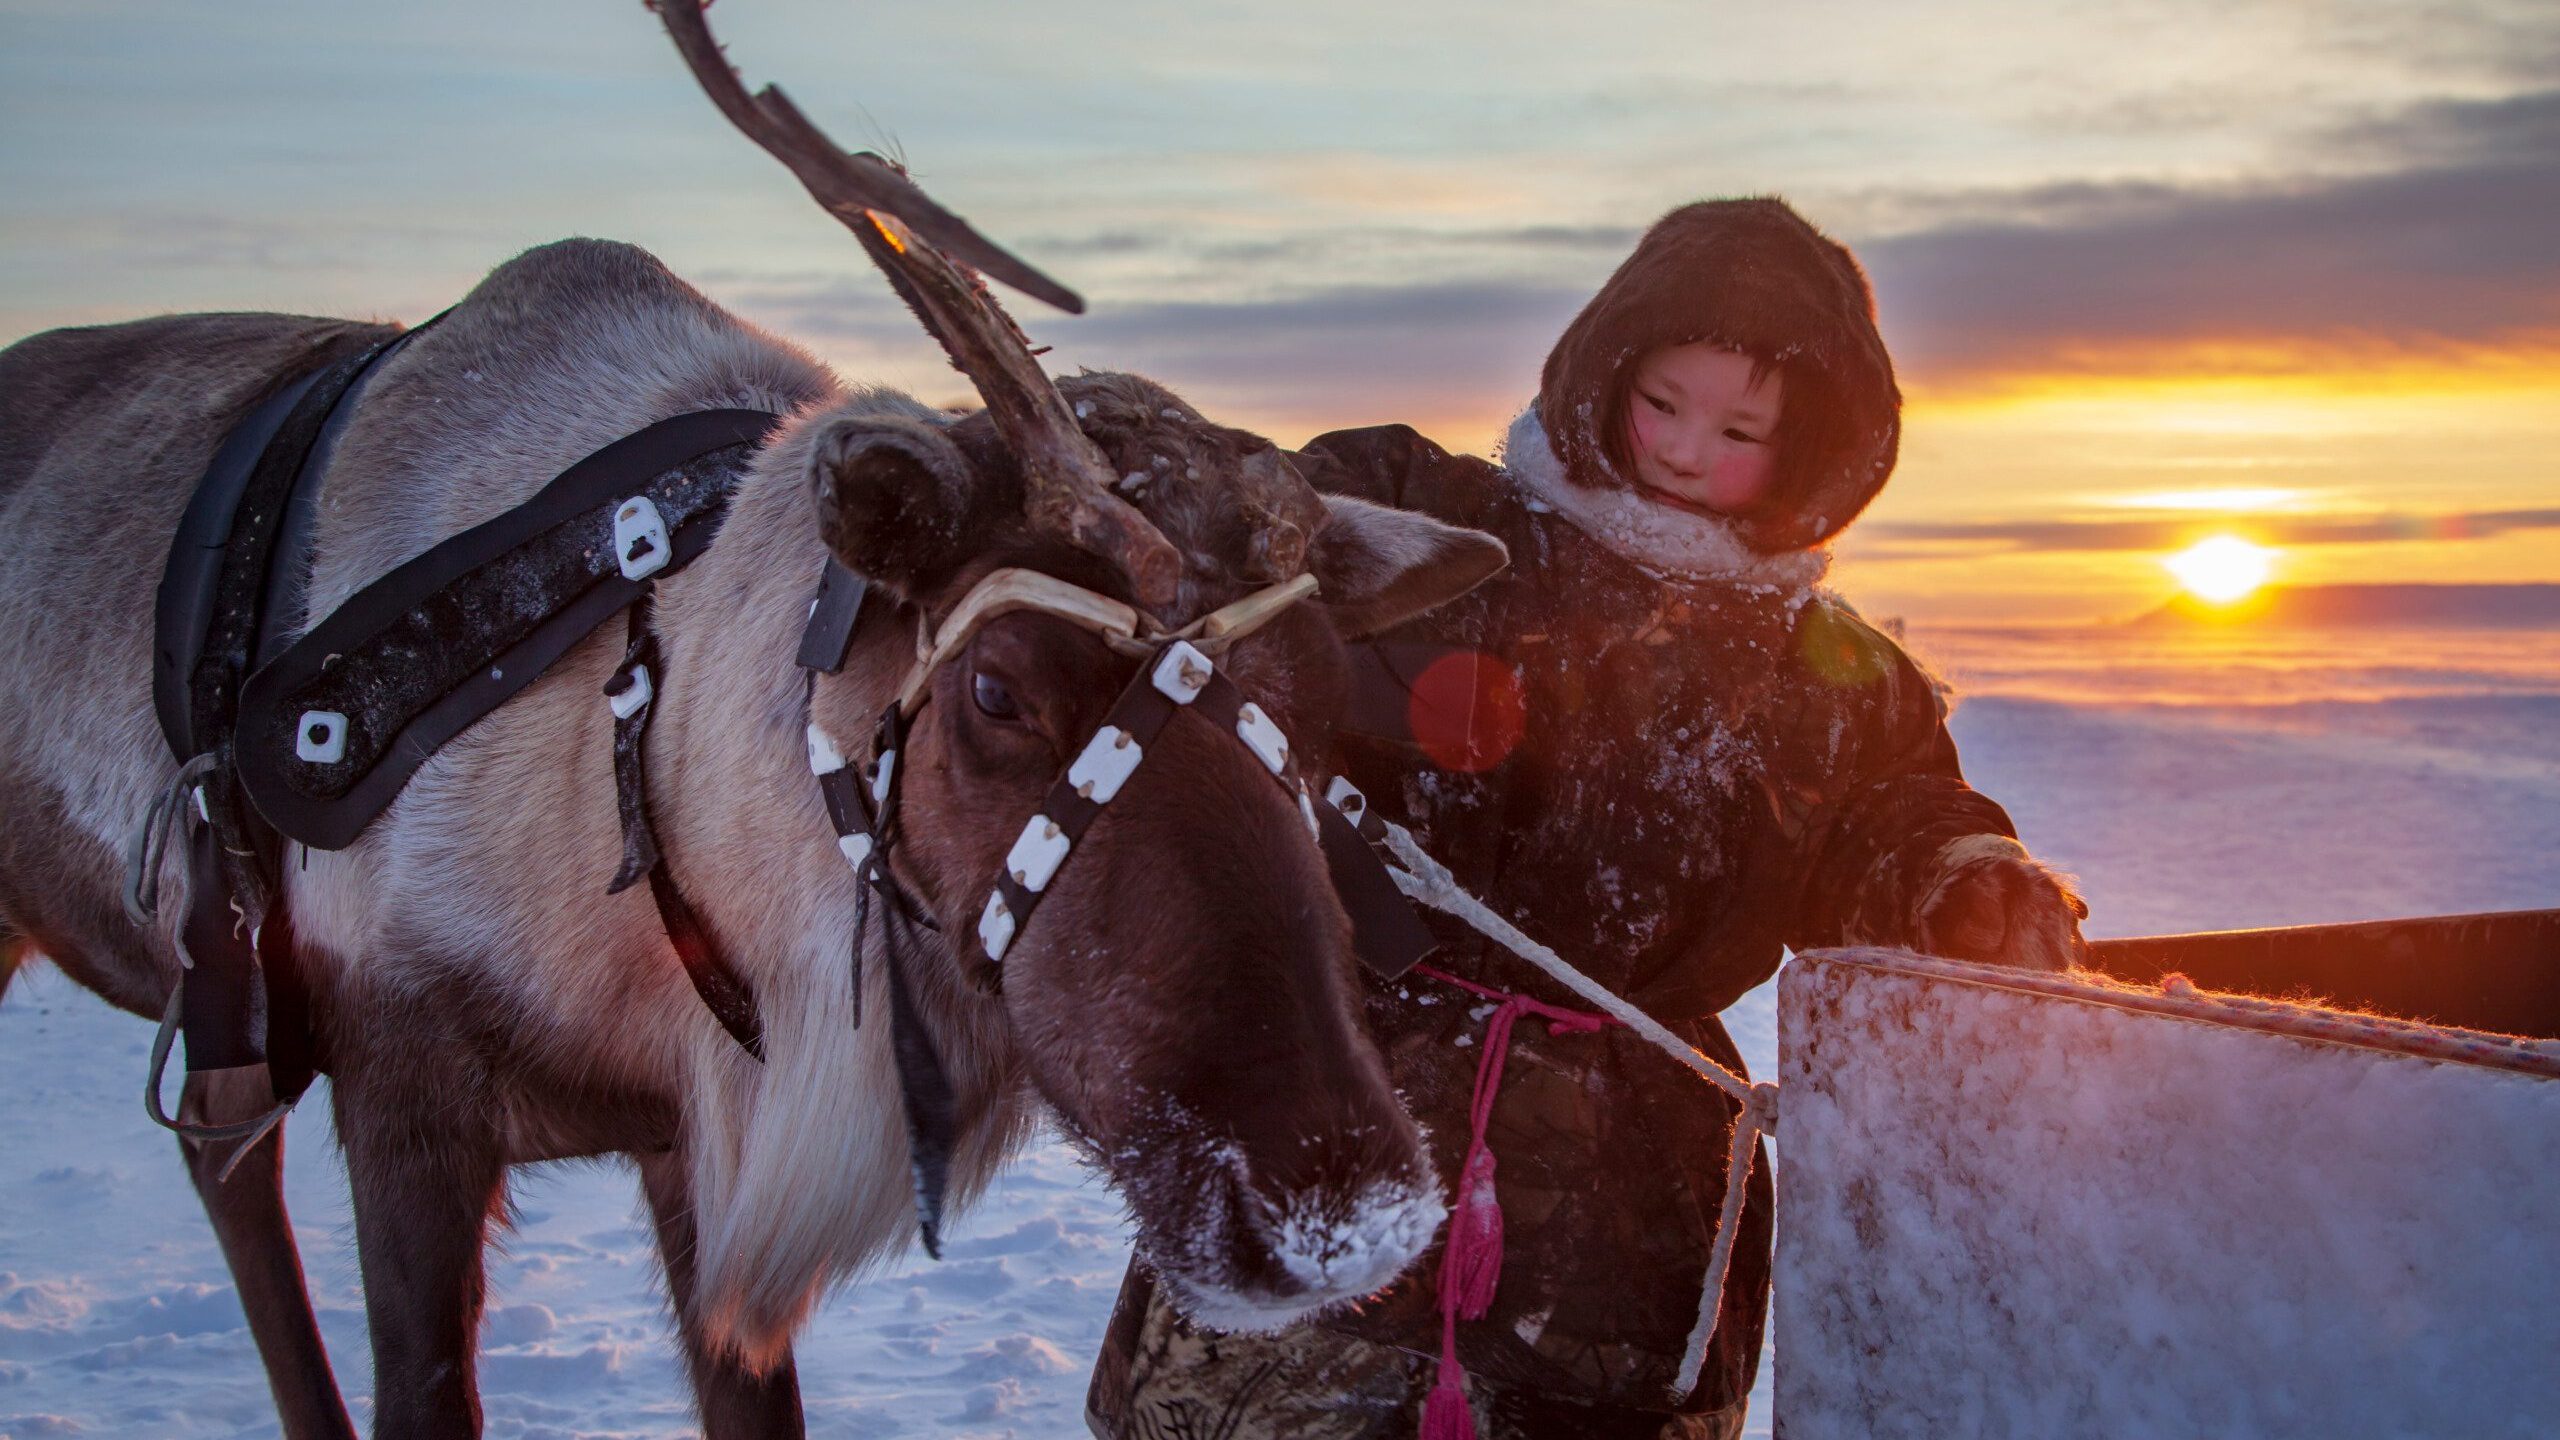 A Nenets girl in Siberia with a reindeer.